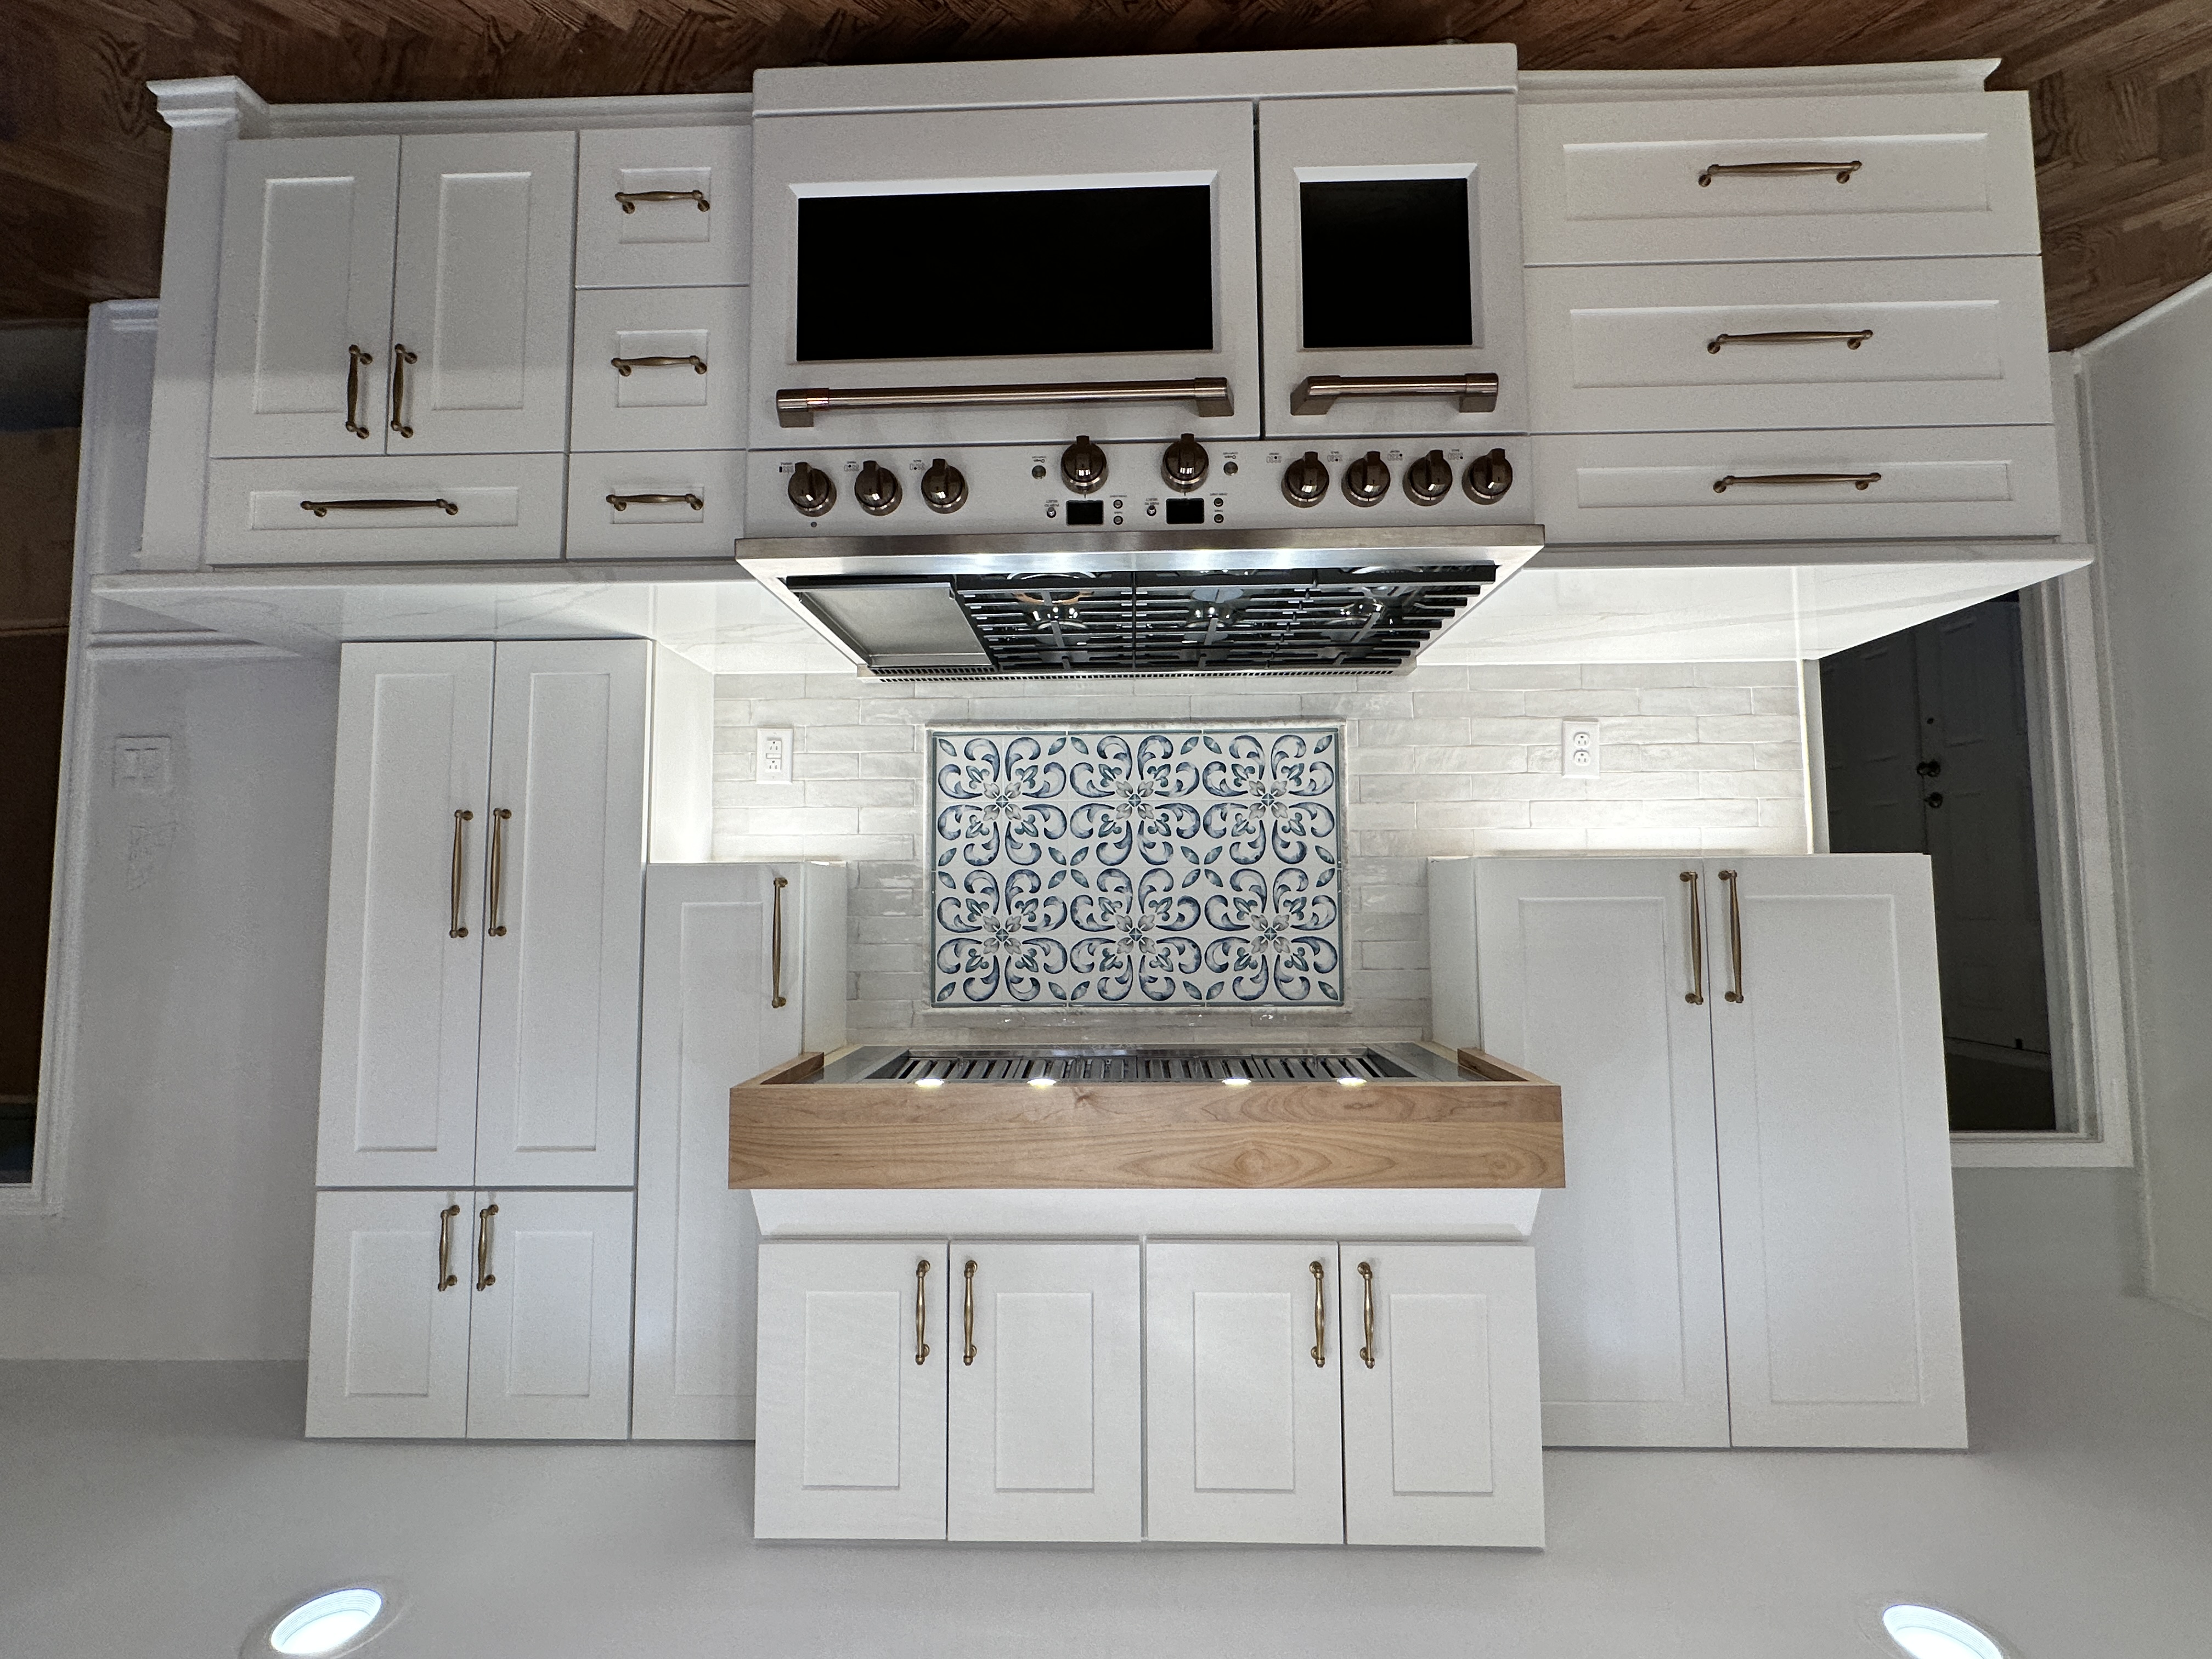 Quail Hollow Kitchen Remodel in Raleigh, NC.